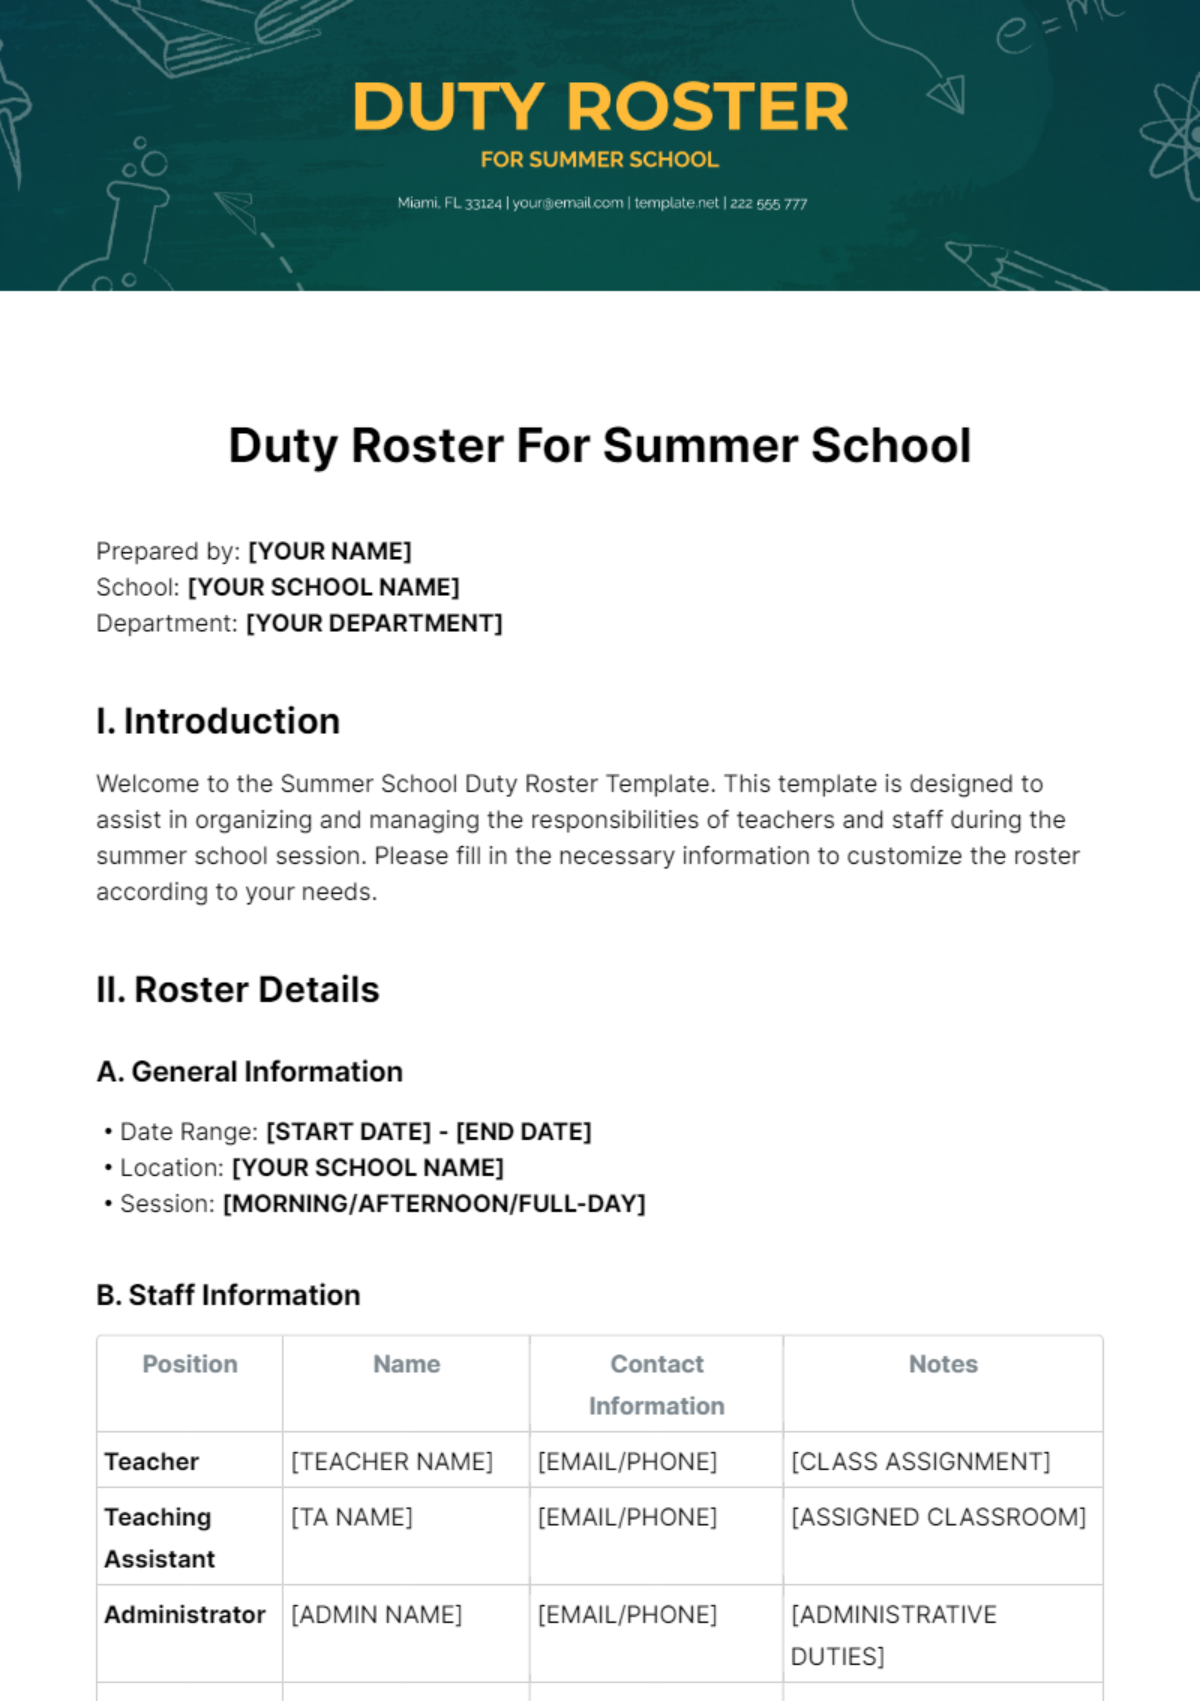 Duty Roster For Summer School Template